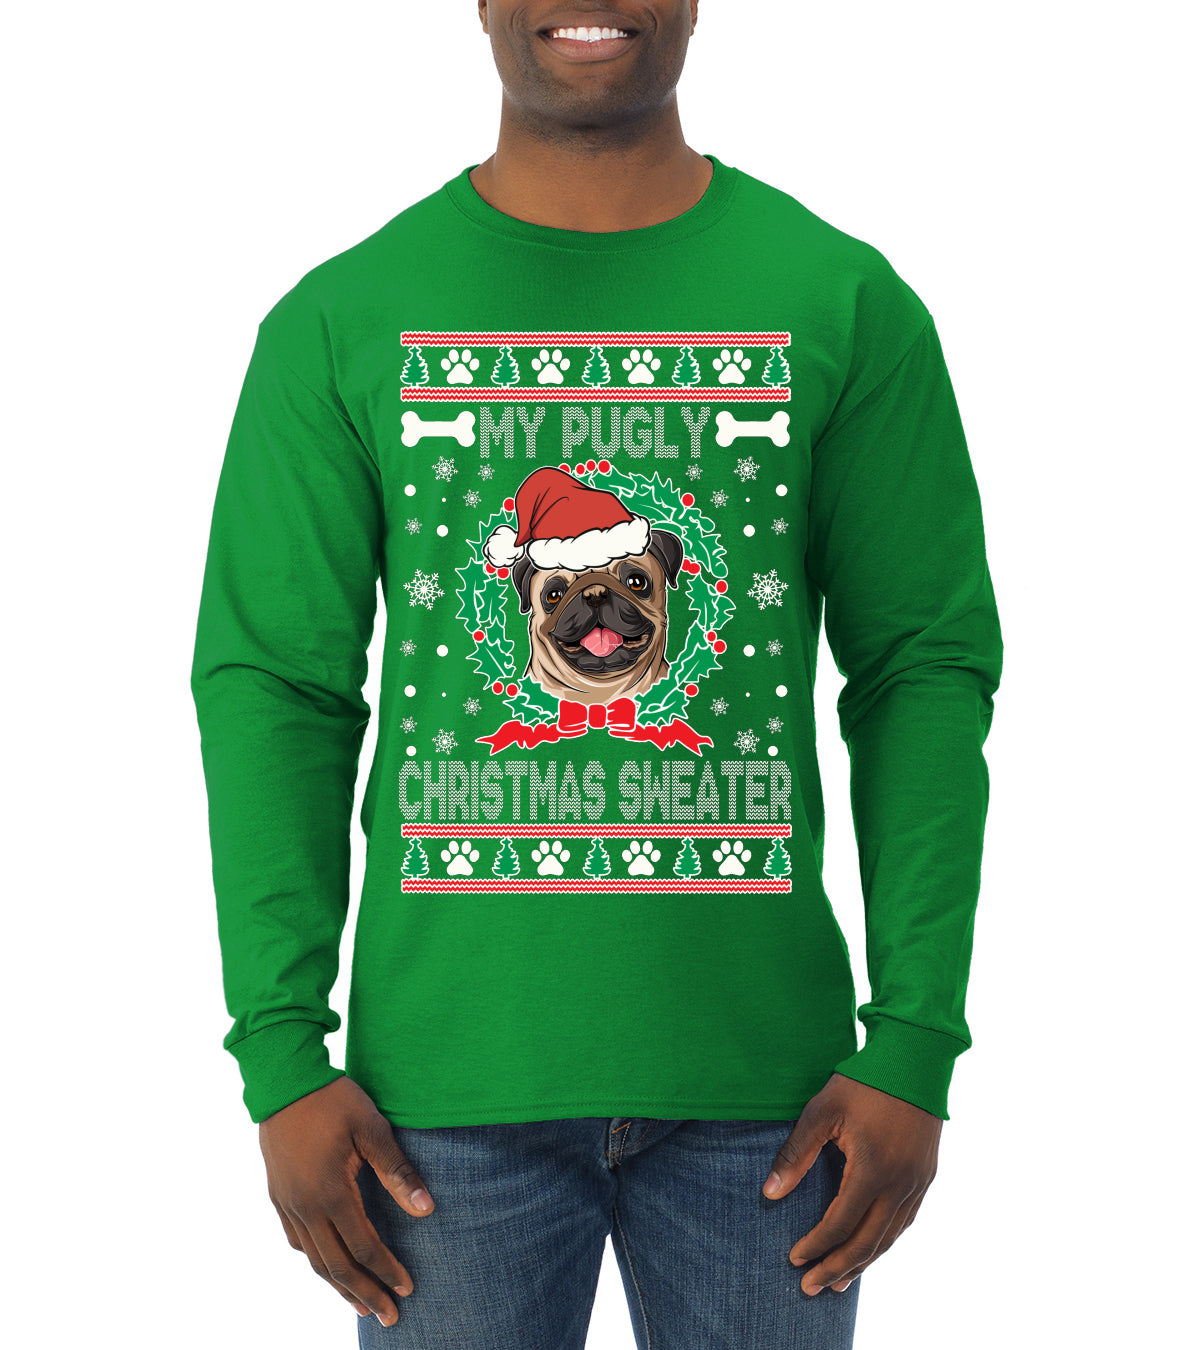 My Pugly Christmas Sweater Ugly Christmas Sweater Mens Long Sleeve Shirt